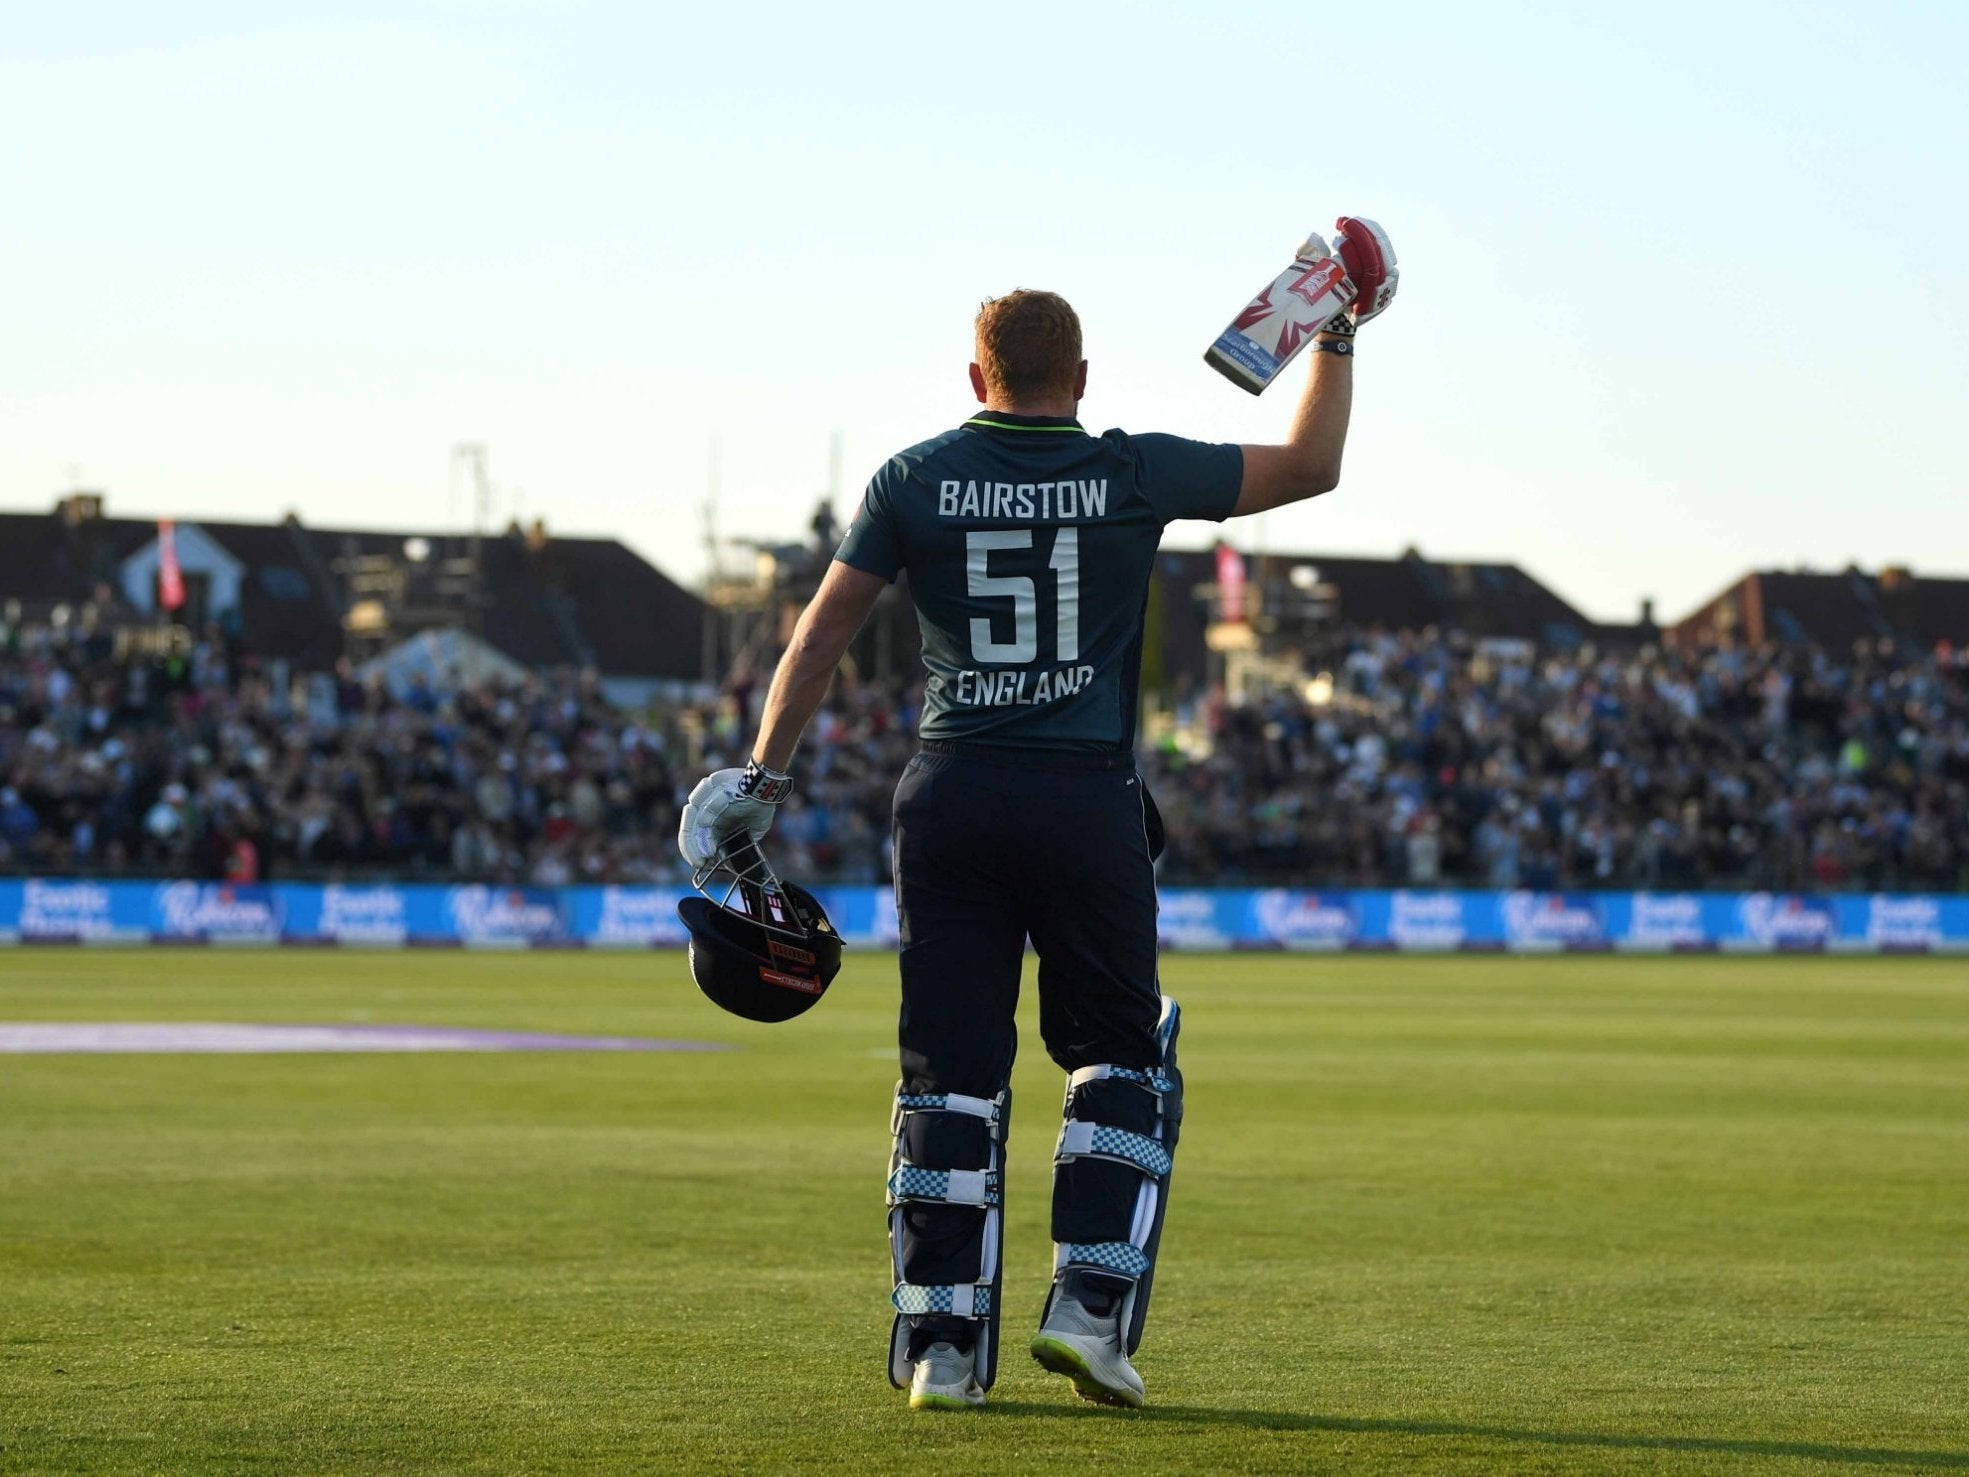 Bairstow's knock saw England home with ease